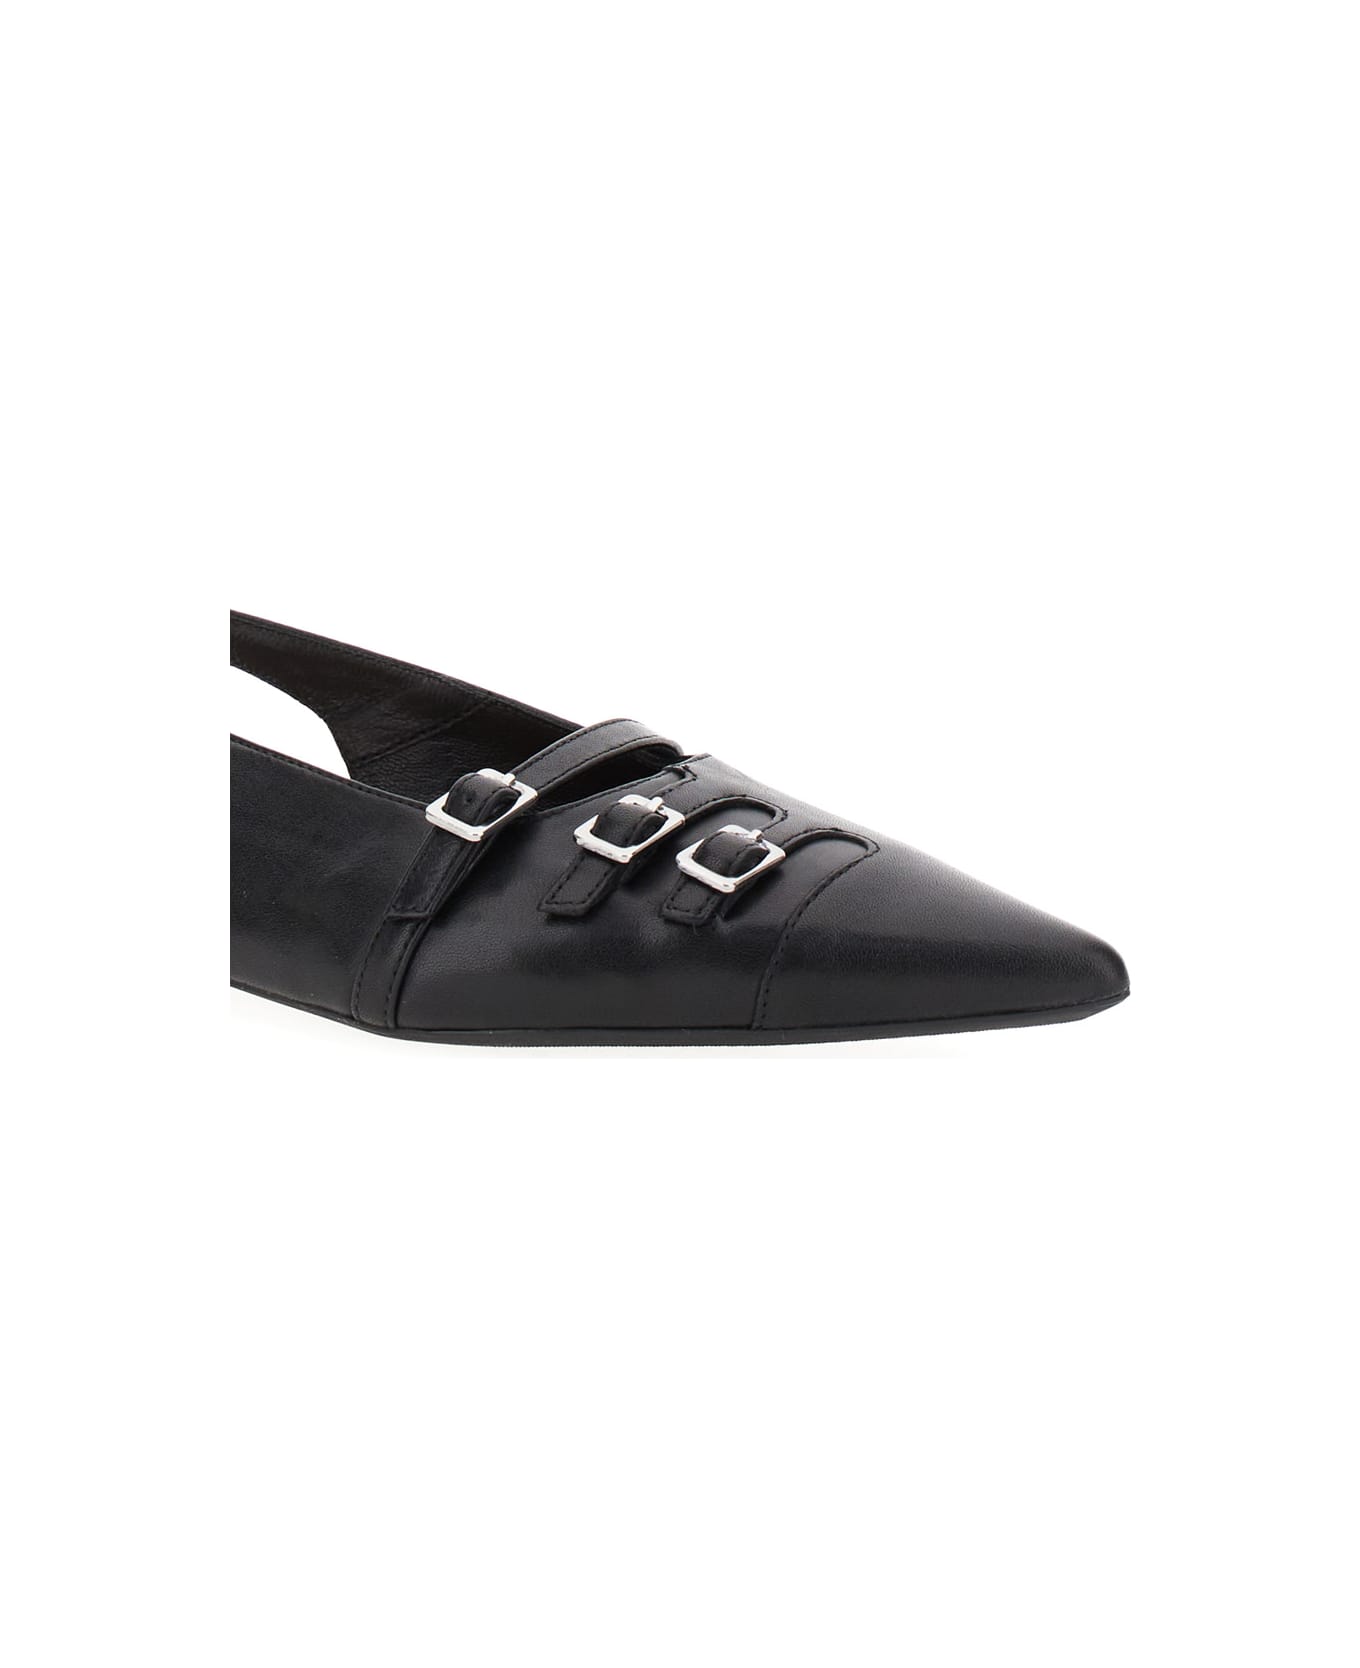 Vagabond 'hermine' Black Slingback Ballet Flats With Decorative Buckles In Leather Woman - Black